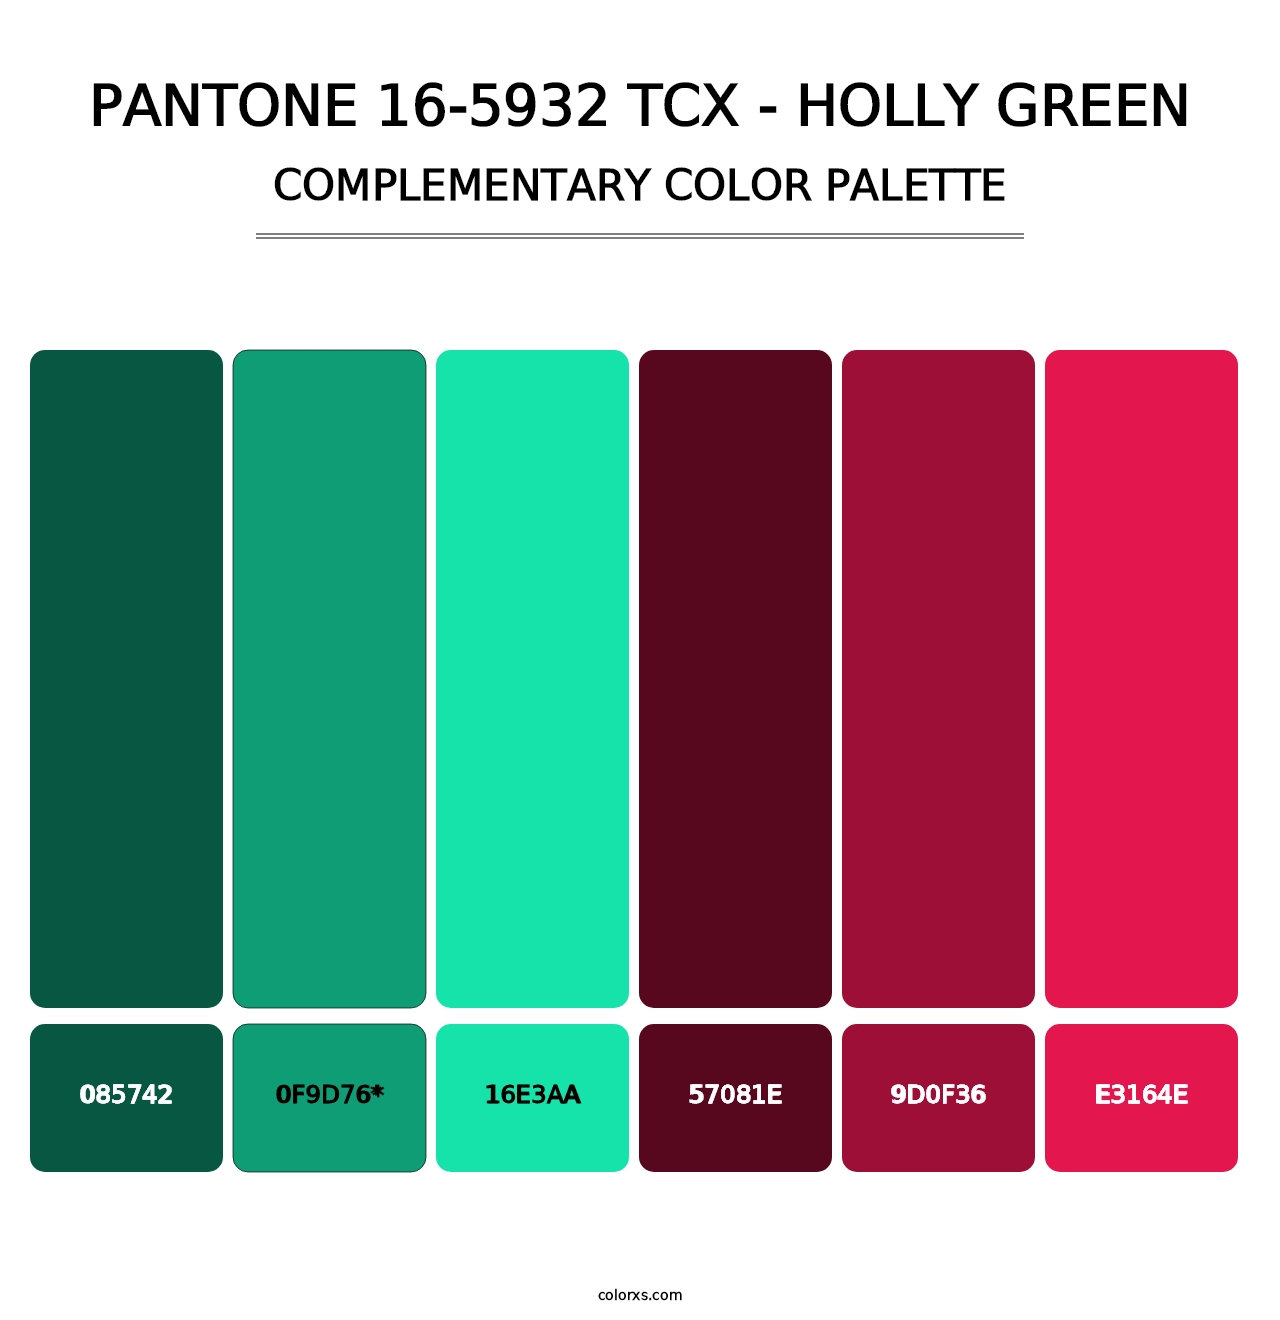 PANTONE 16-5932 TCX - Holly Green - Complementary Color Palette